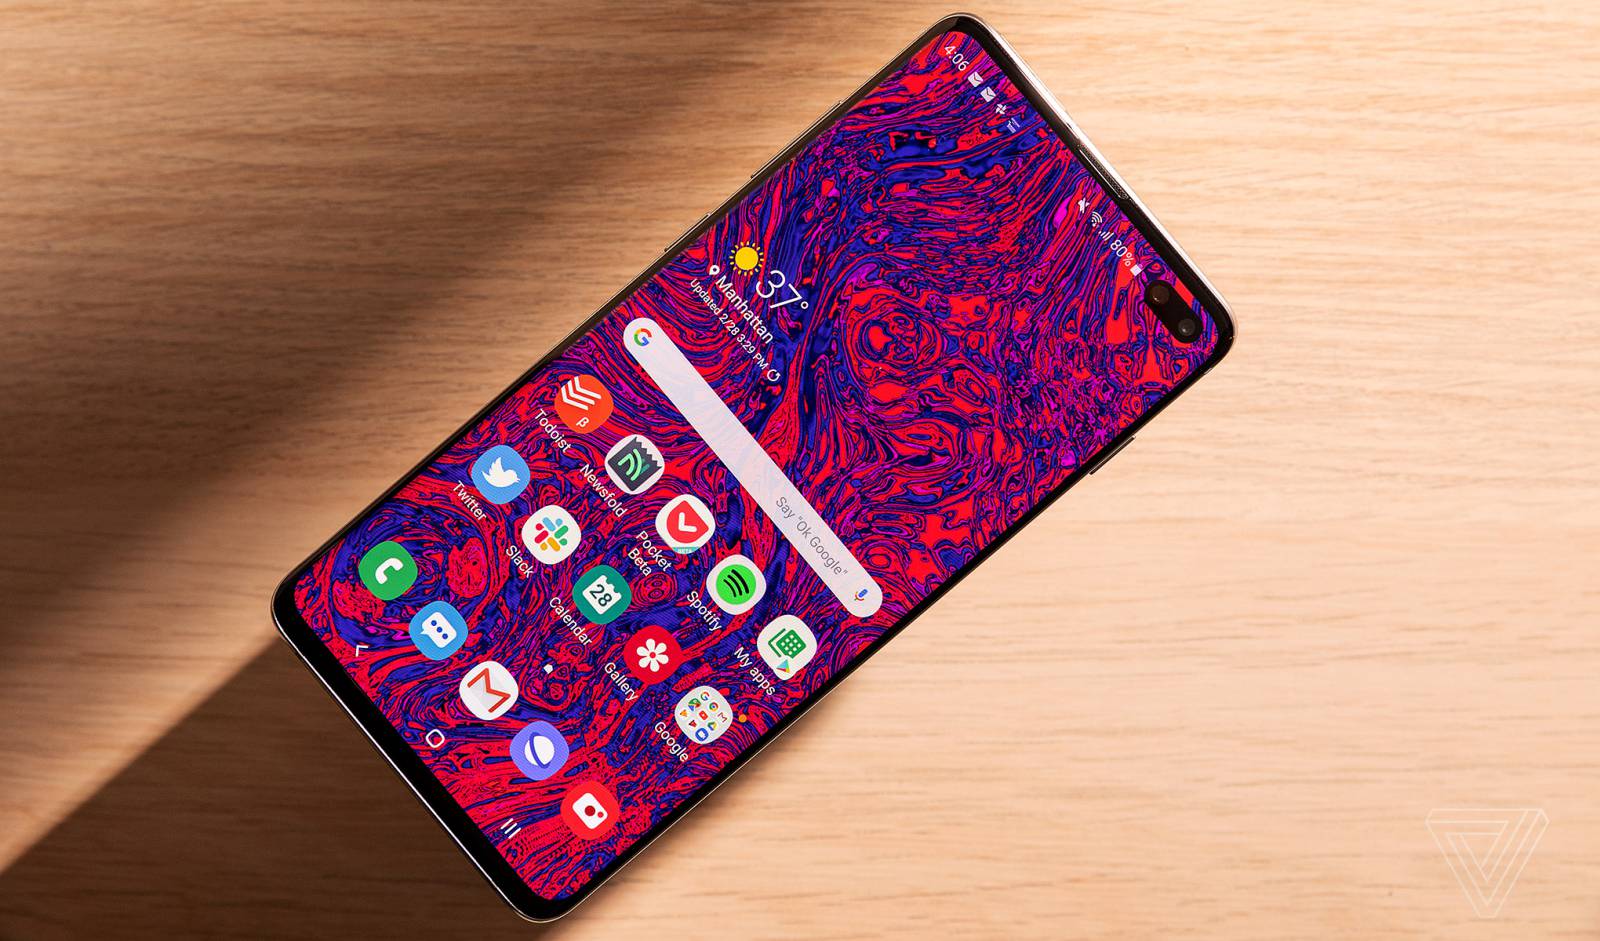 eMAG Samsung GALAXY S10 more discounts